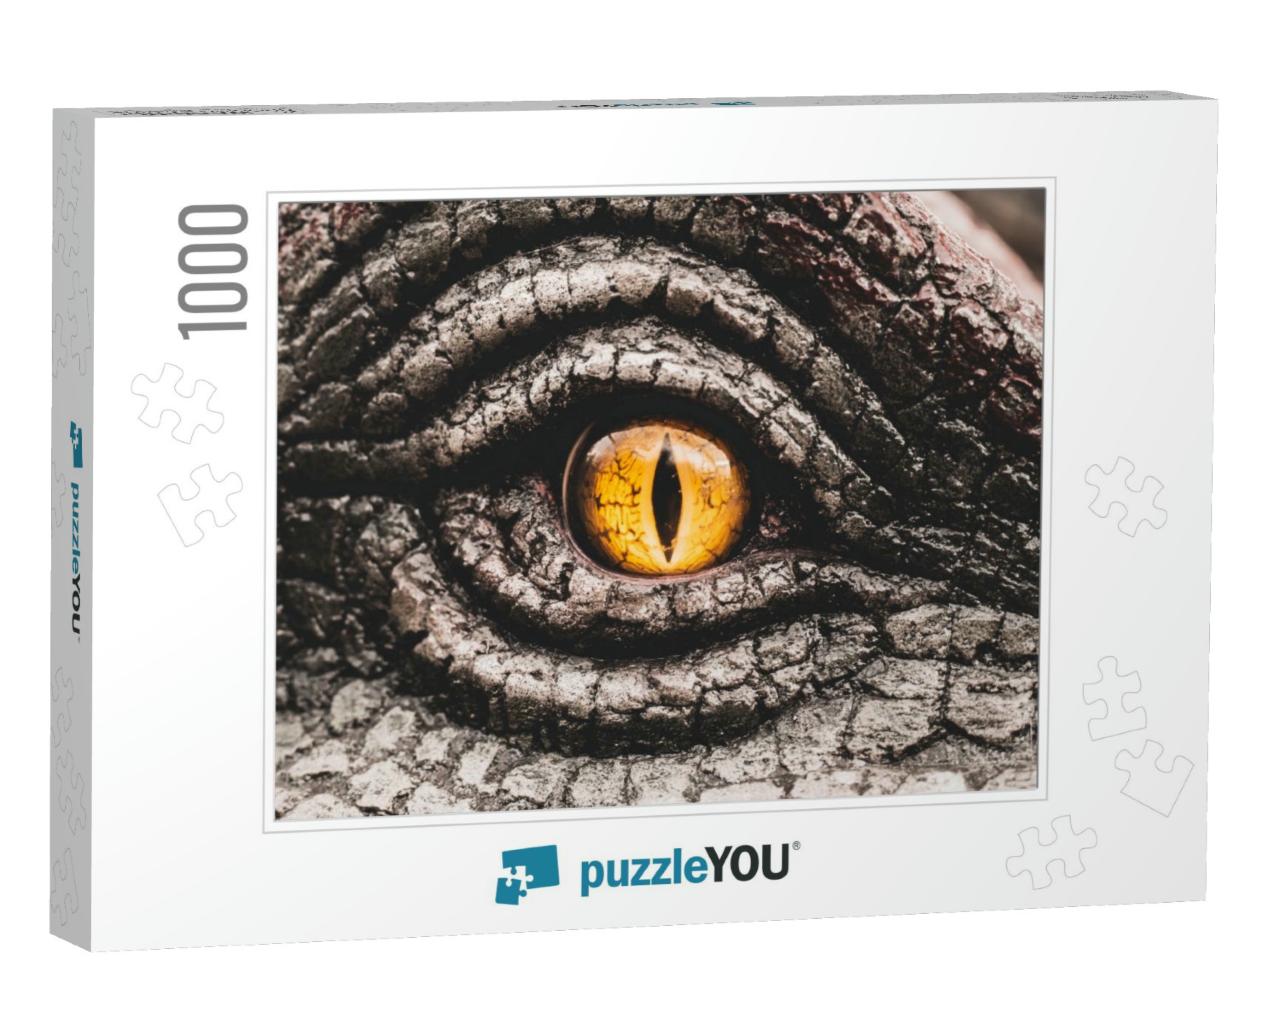 Closeup Yellow Eye of the Dinosaurs with Terrifying. Dino... Jigsaw Puzzle with 1000 pieces